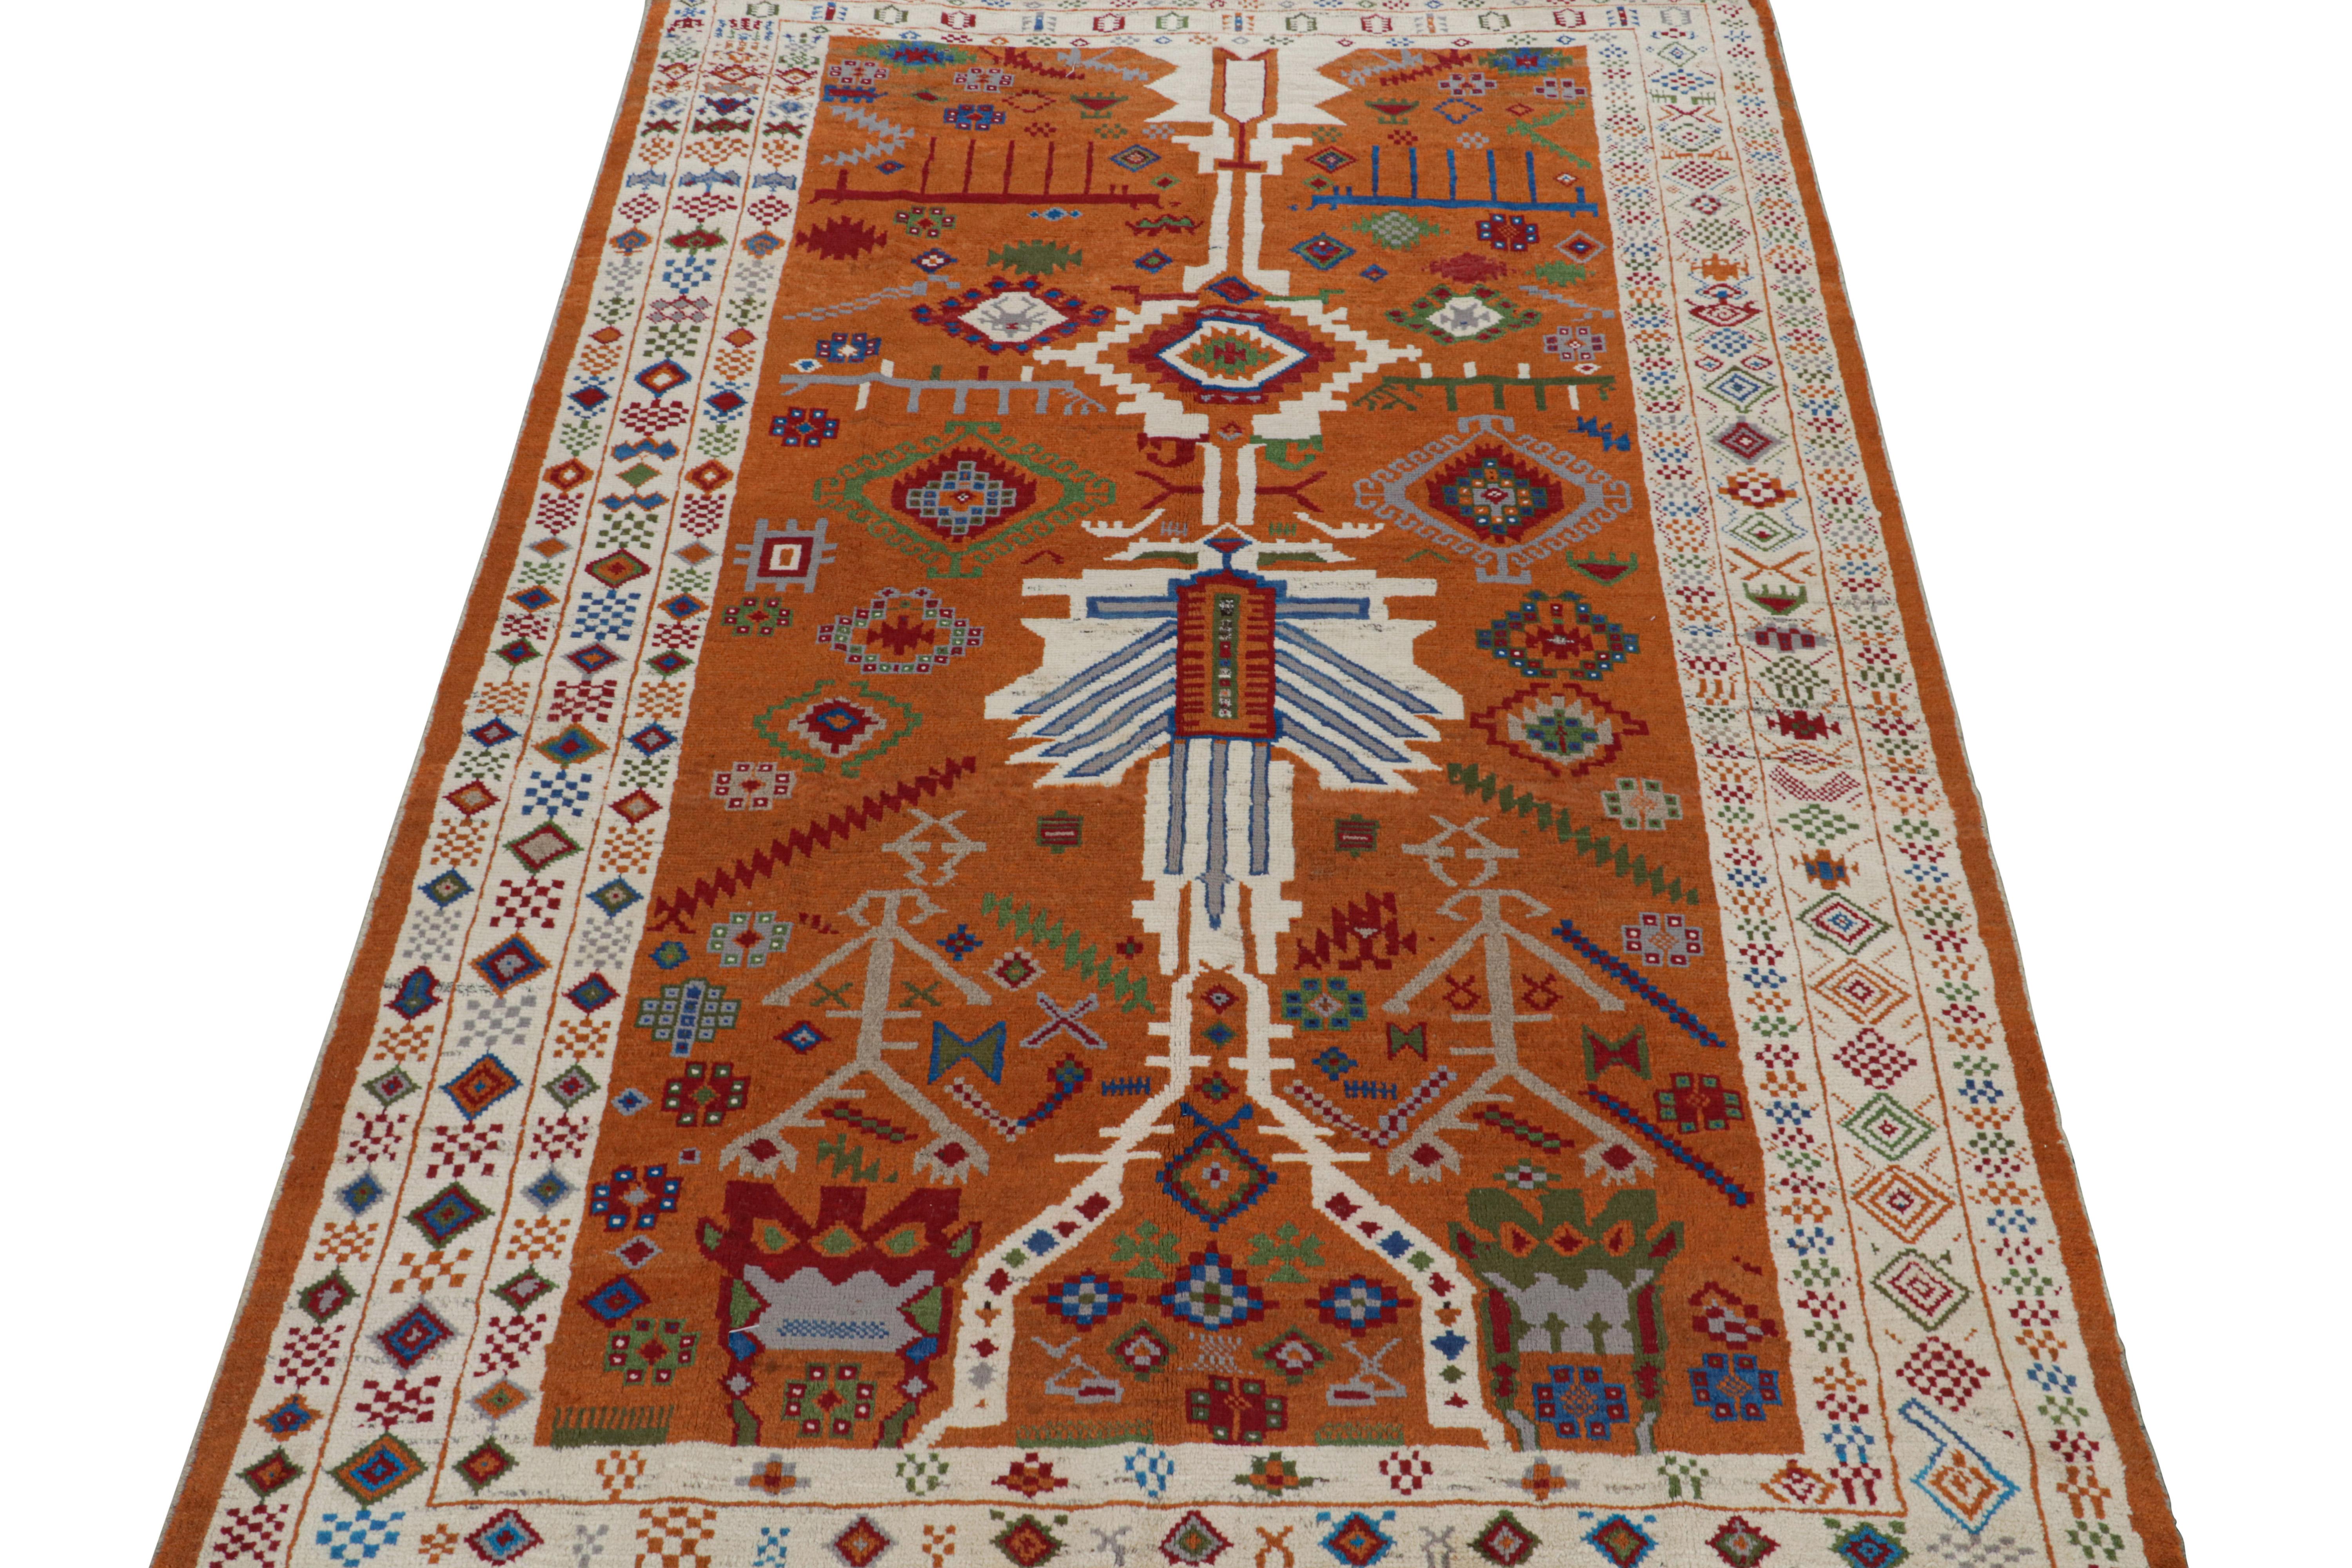 Tribal Rug & Kilim’s Oushak style rug in Orange and White with Geometric Patterns For Sale